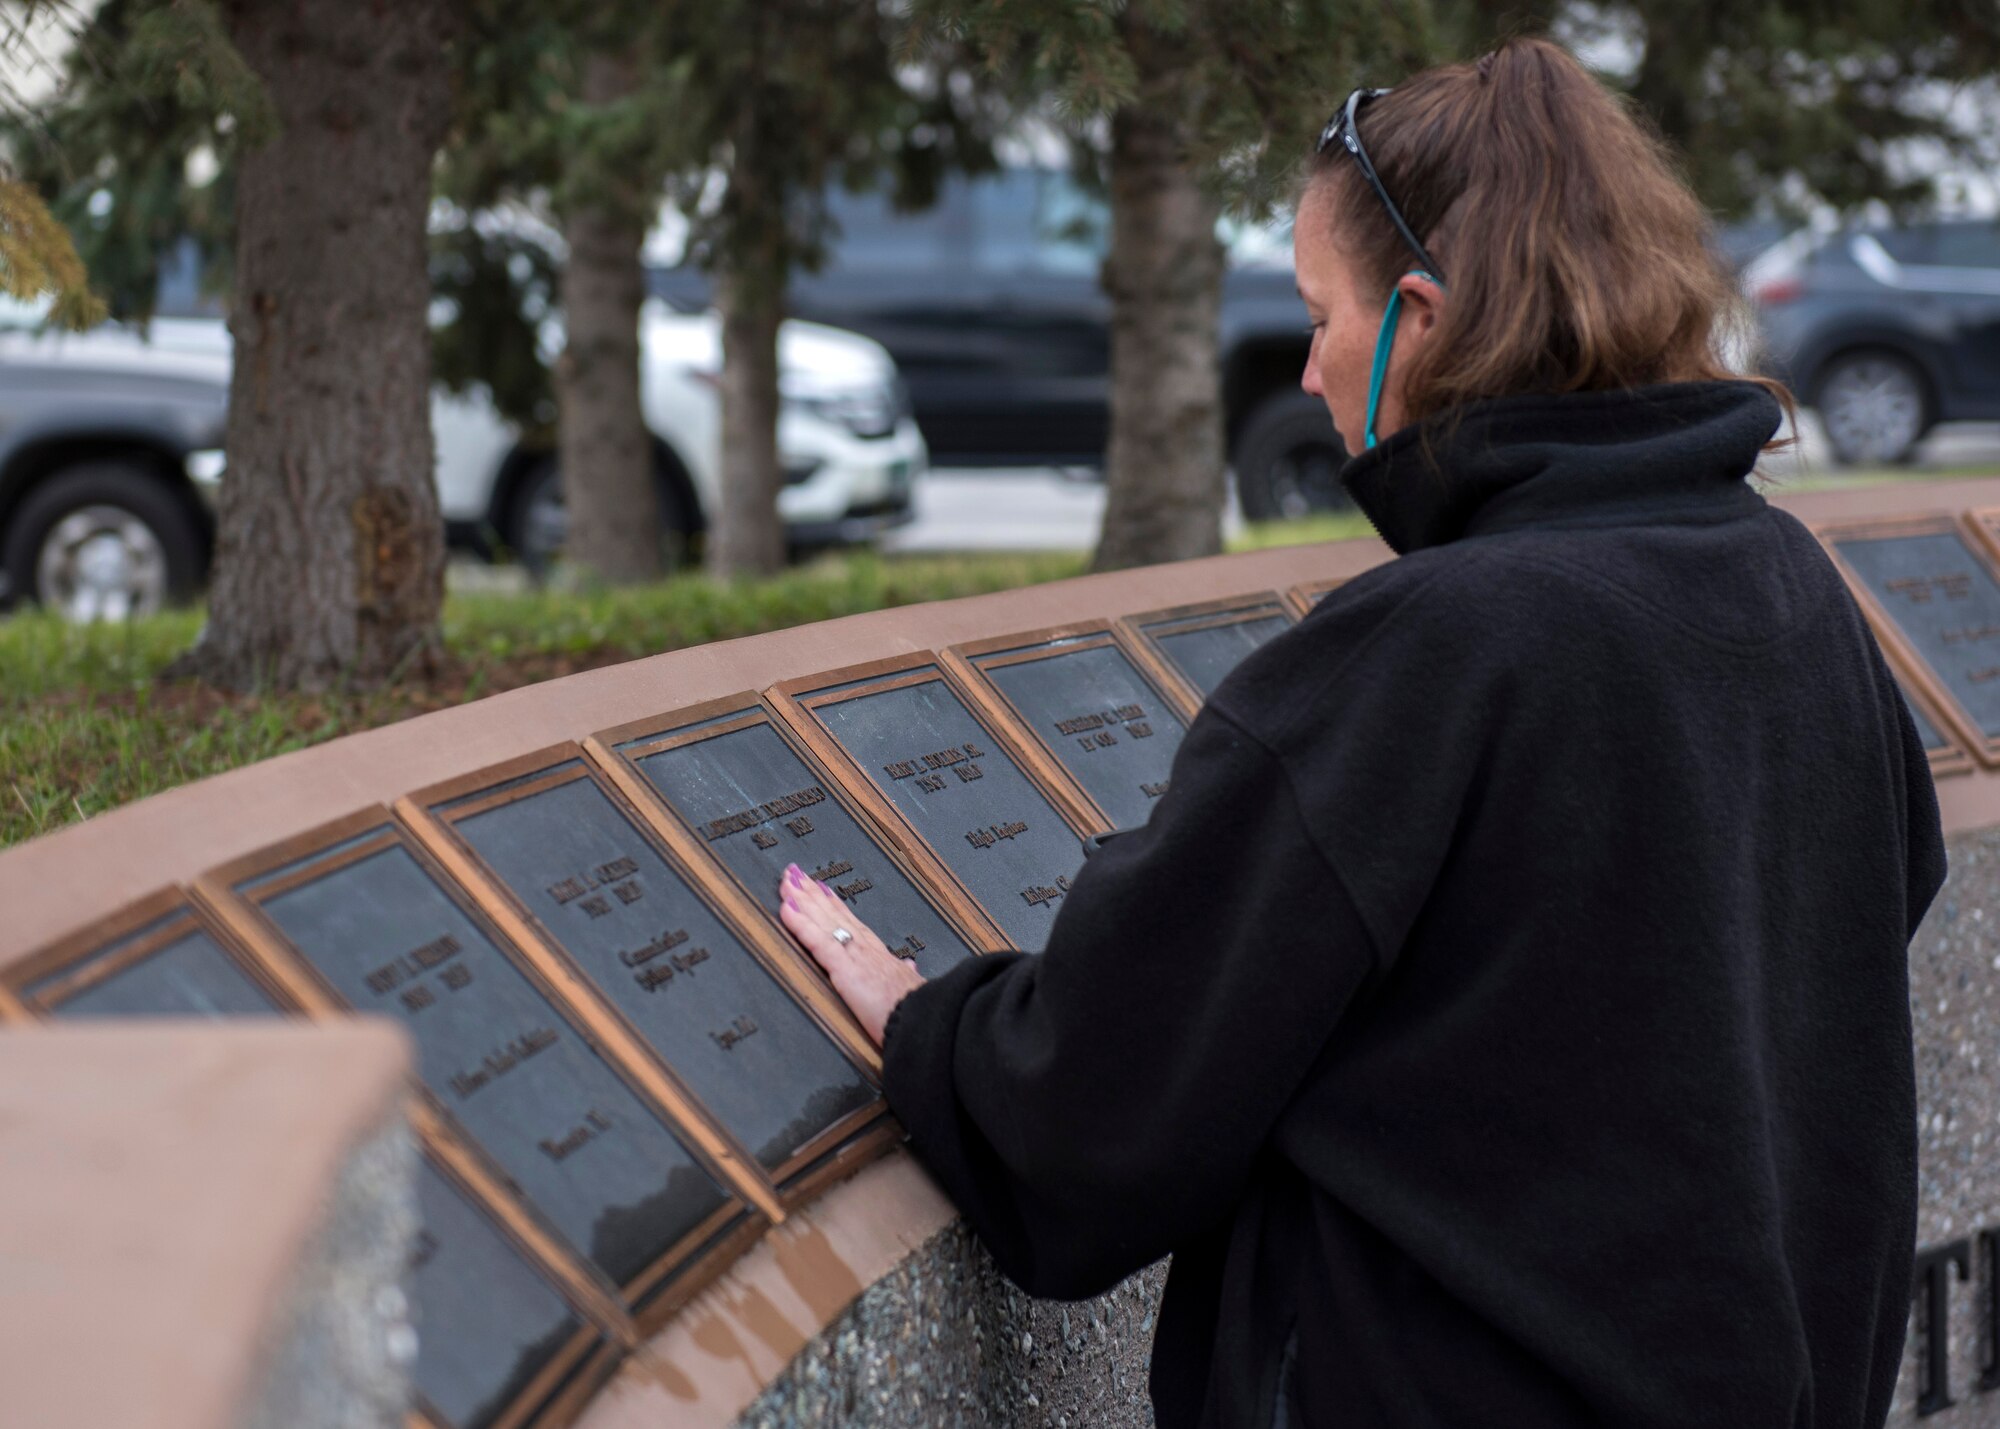 A surviving family member places her hand on the name plaque of one of the lost Yukla 27 crew members at the Yukla 27 25th anniversary memorial ceremony at Joint Base Elmendorf-Richardson, Alaska, Sept. 22, 2020. Yukla 27, a U.S. Air Force E-3 Sentry airborne warning and control system aircraft assigned to the 962nd AACS, encountered a flock of geese Sept. 22, 1995, and crashed shortly after takeoff on a routine surveillance training sortie, killing all 24 Canadian and U.S. Airmen aboard.